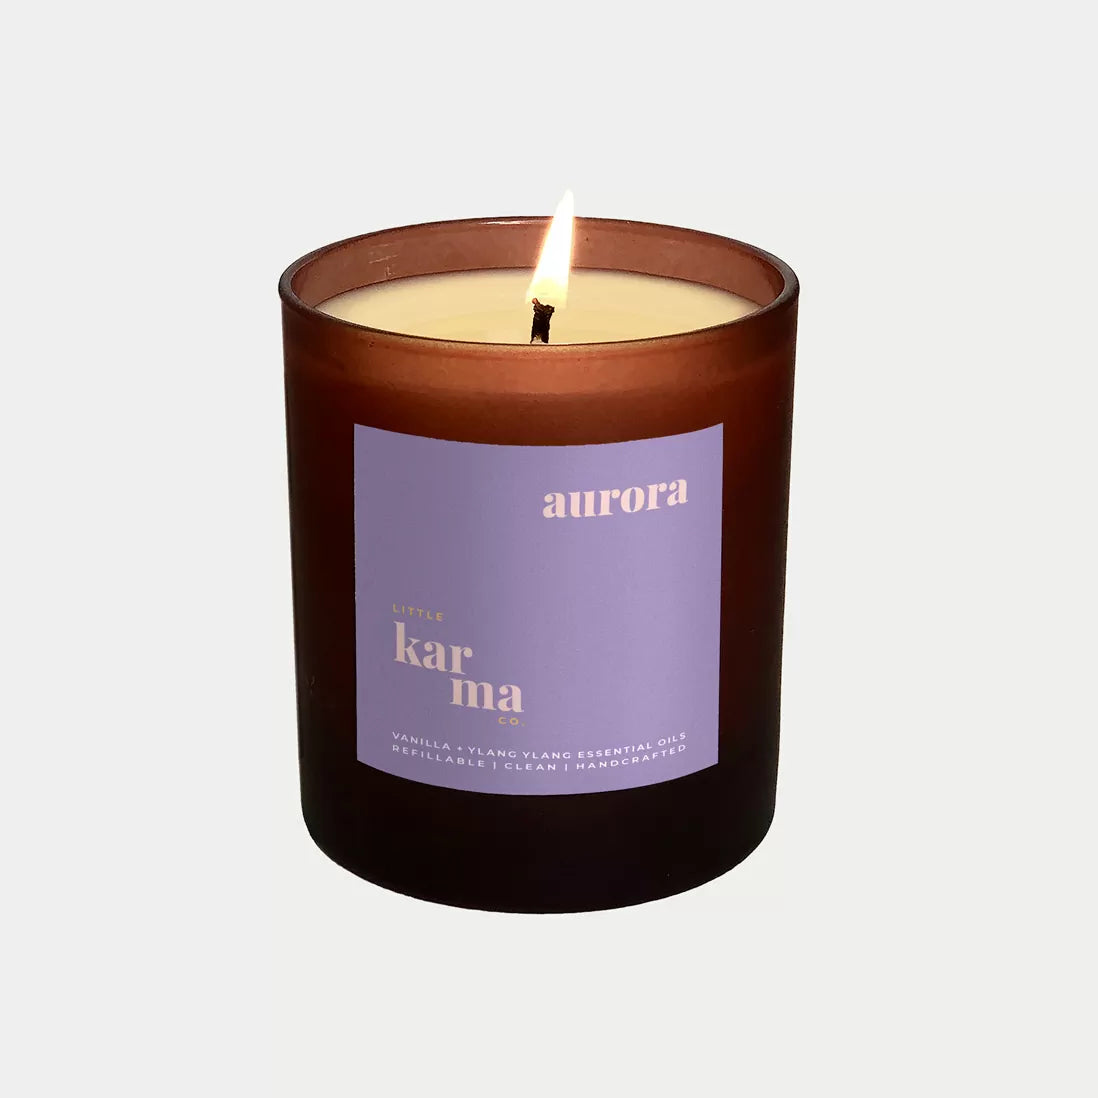 Little Karma Co. - Aurora Soothing Candle